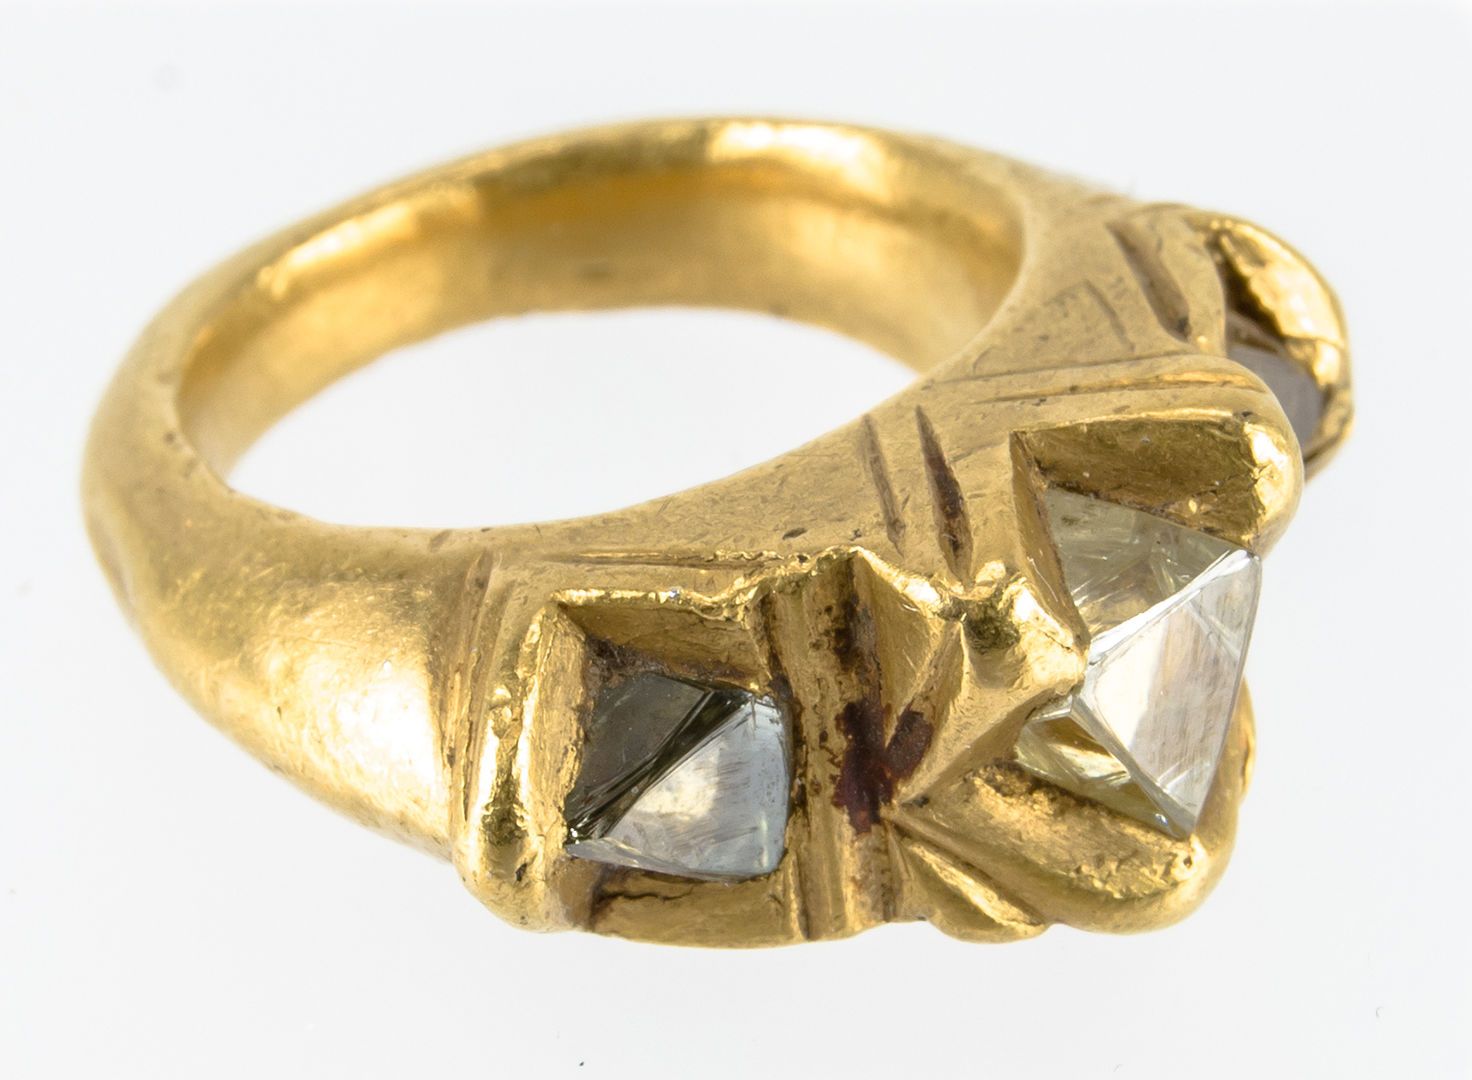 Rough octahedral diamonds in an 11th to 13th century ring from Pakistan or Afghanistan. Benjamin Zucker Family Collection.